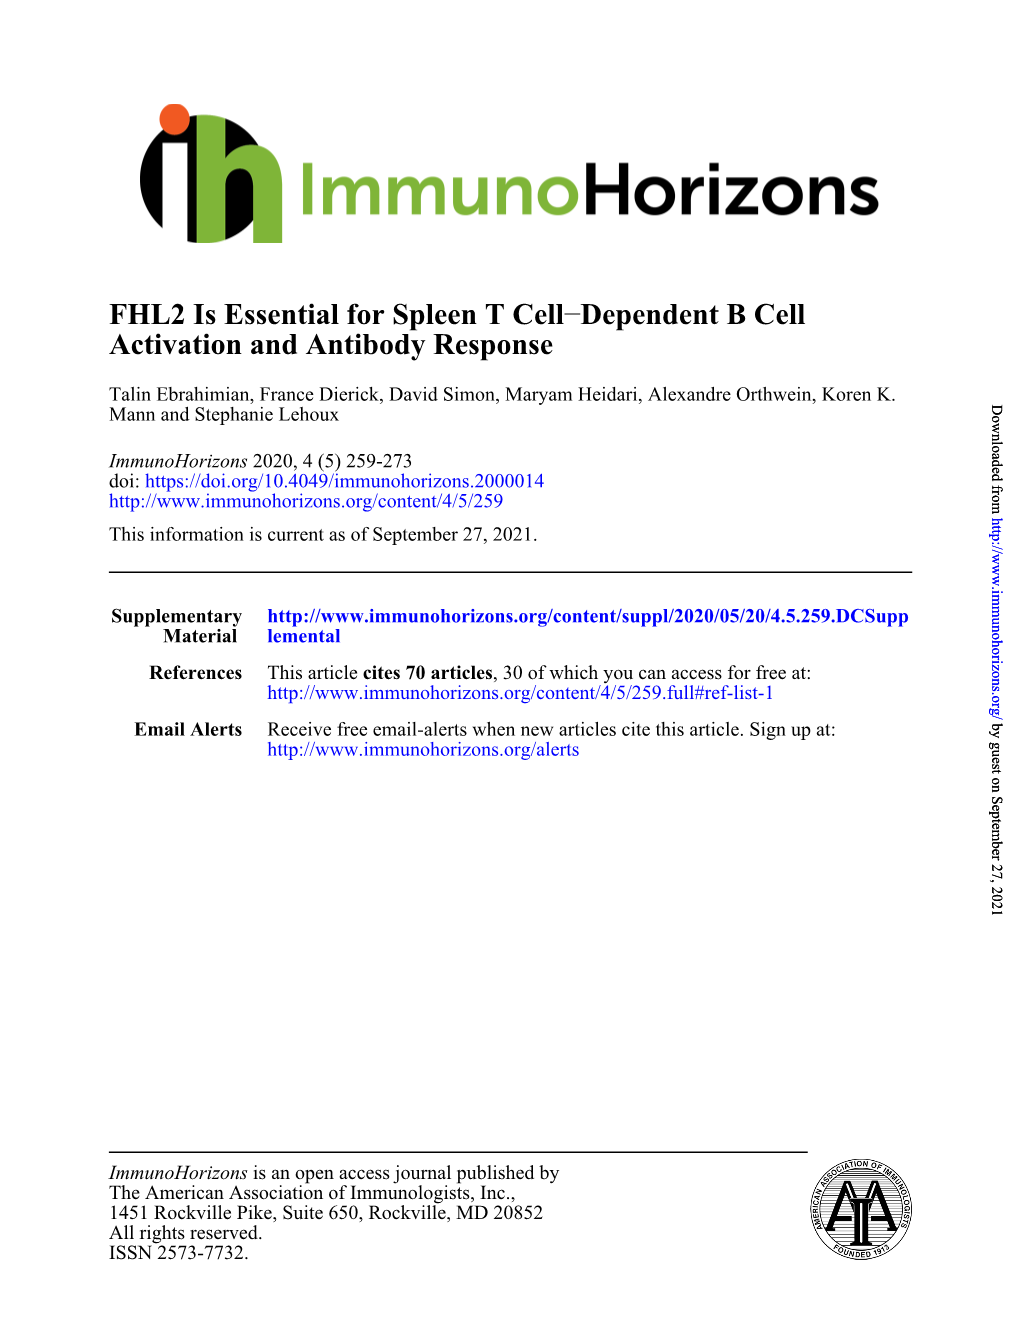 Activation and Antibody Response Dependent B Cell − FHL2 Is